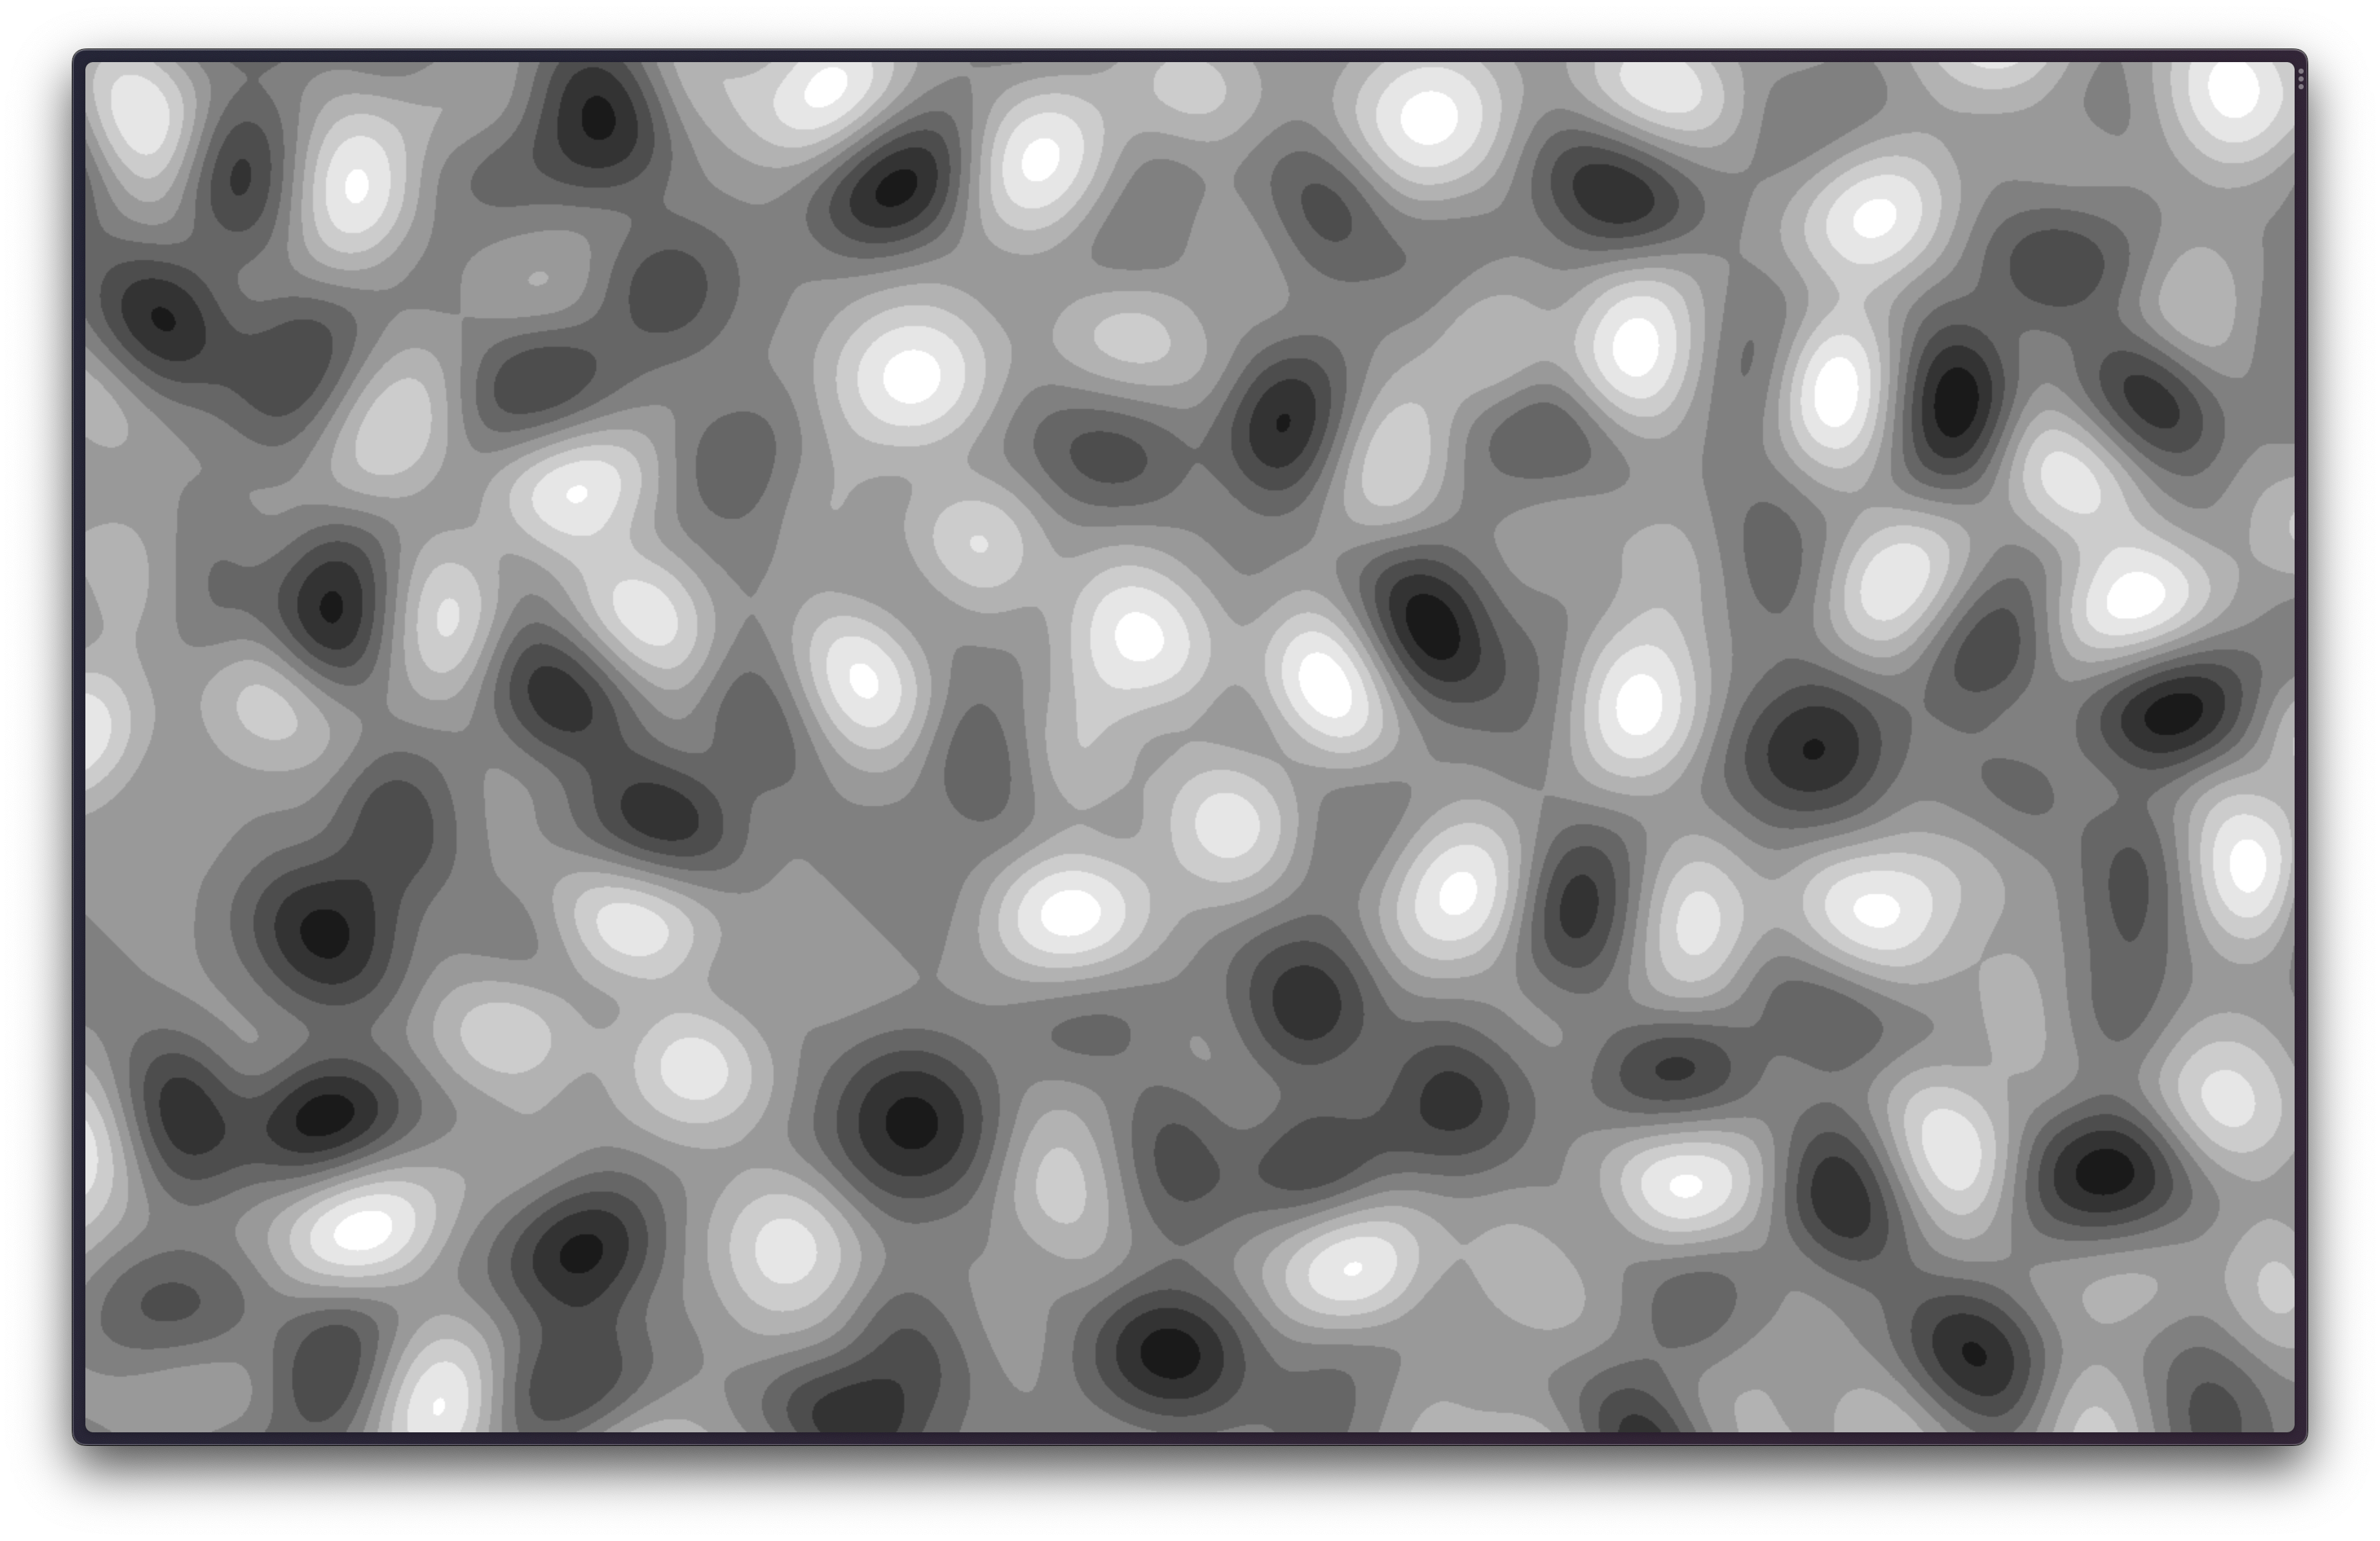 Fragment shader with normalized, posterized Perlin noise